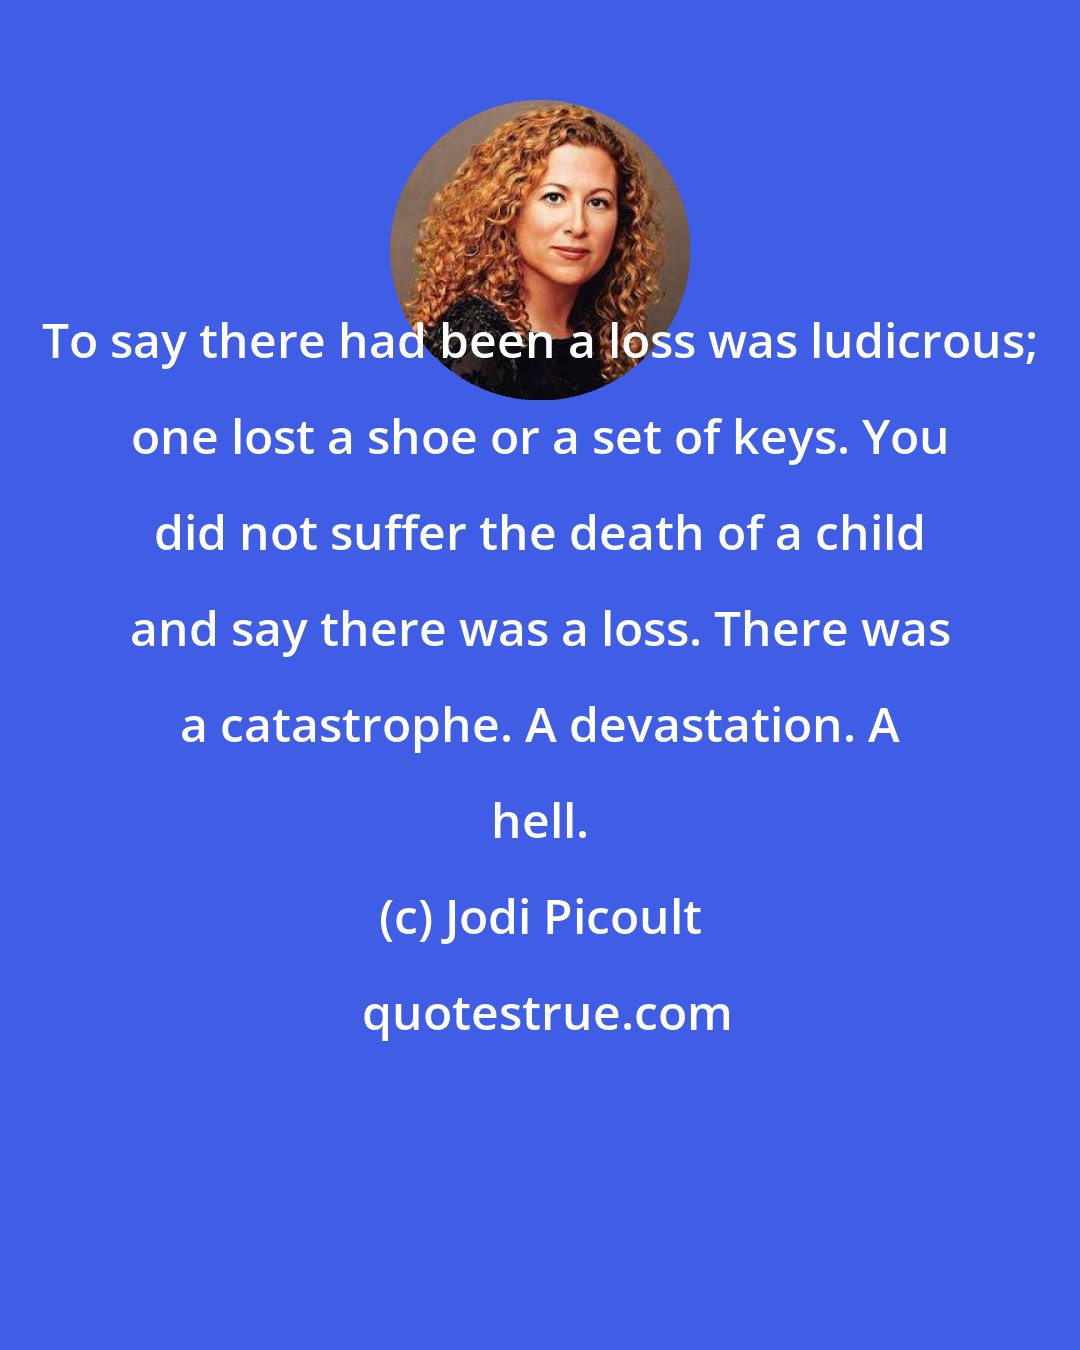 Jodi Picoult: To say there had been a loss was ludicrous; one lost a shoe or a set of keys. You did not suffer the death of a child and say there was a loss. There was a catastrophe. A devastation. A hell.